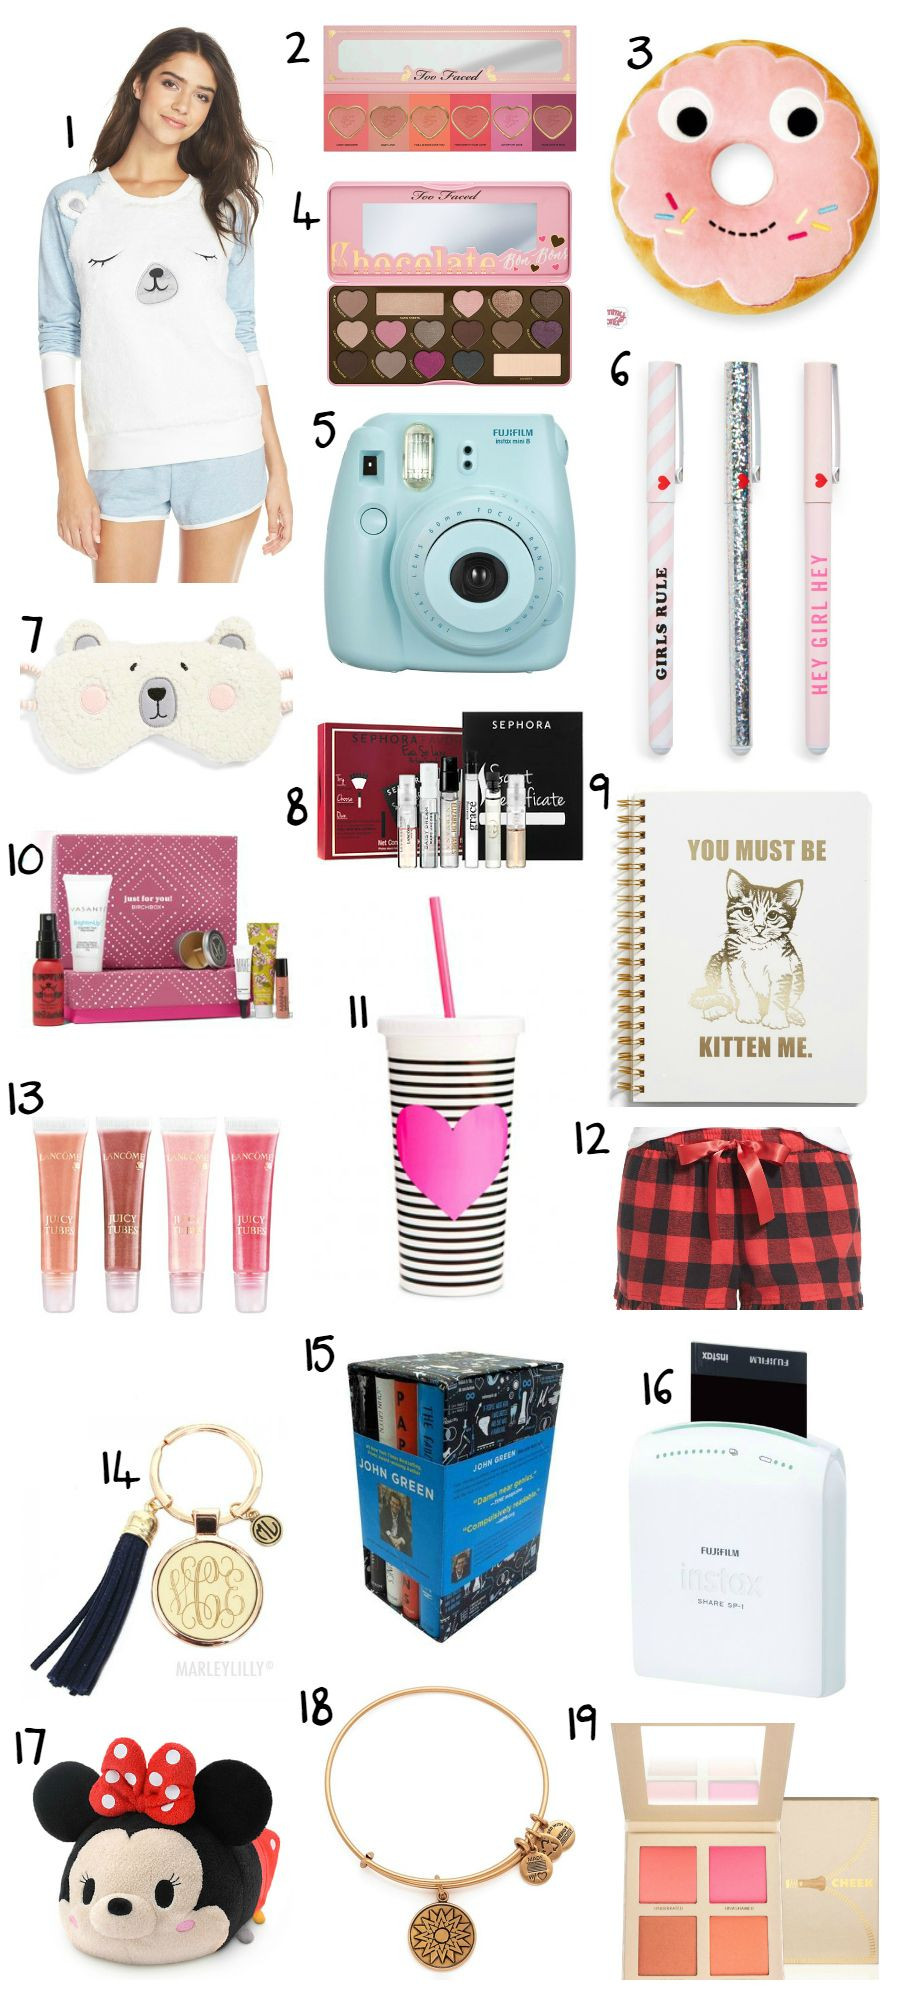 Great Gift Ideas For Girls
 The Best Christmas Gift Ideas for Teens